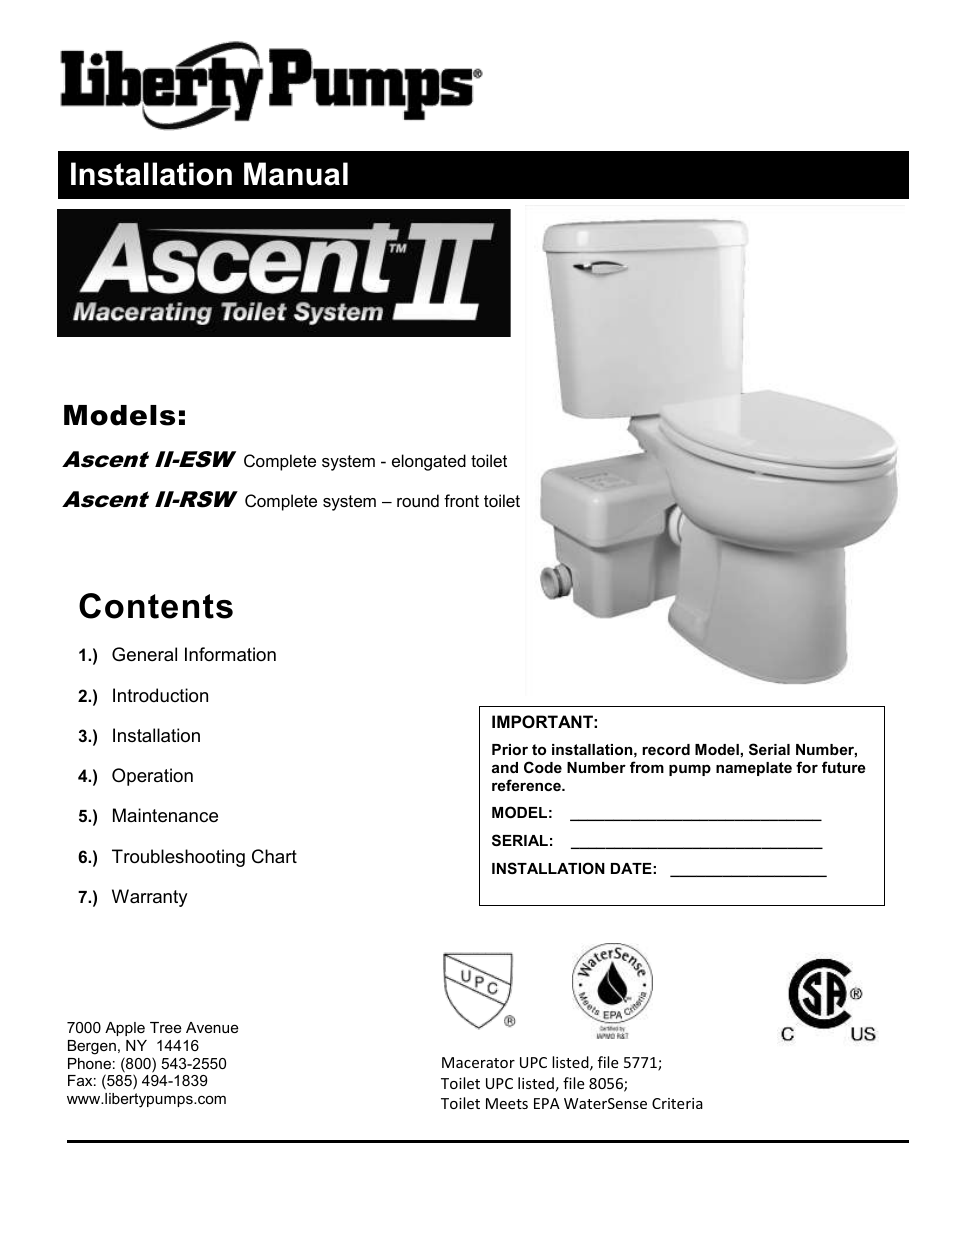 Liberty Pumps Ascent II User Manual | 55 pages Ascent 2 Macerating Toilet System Troubleshooting